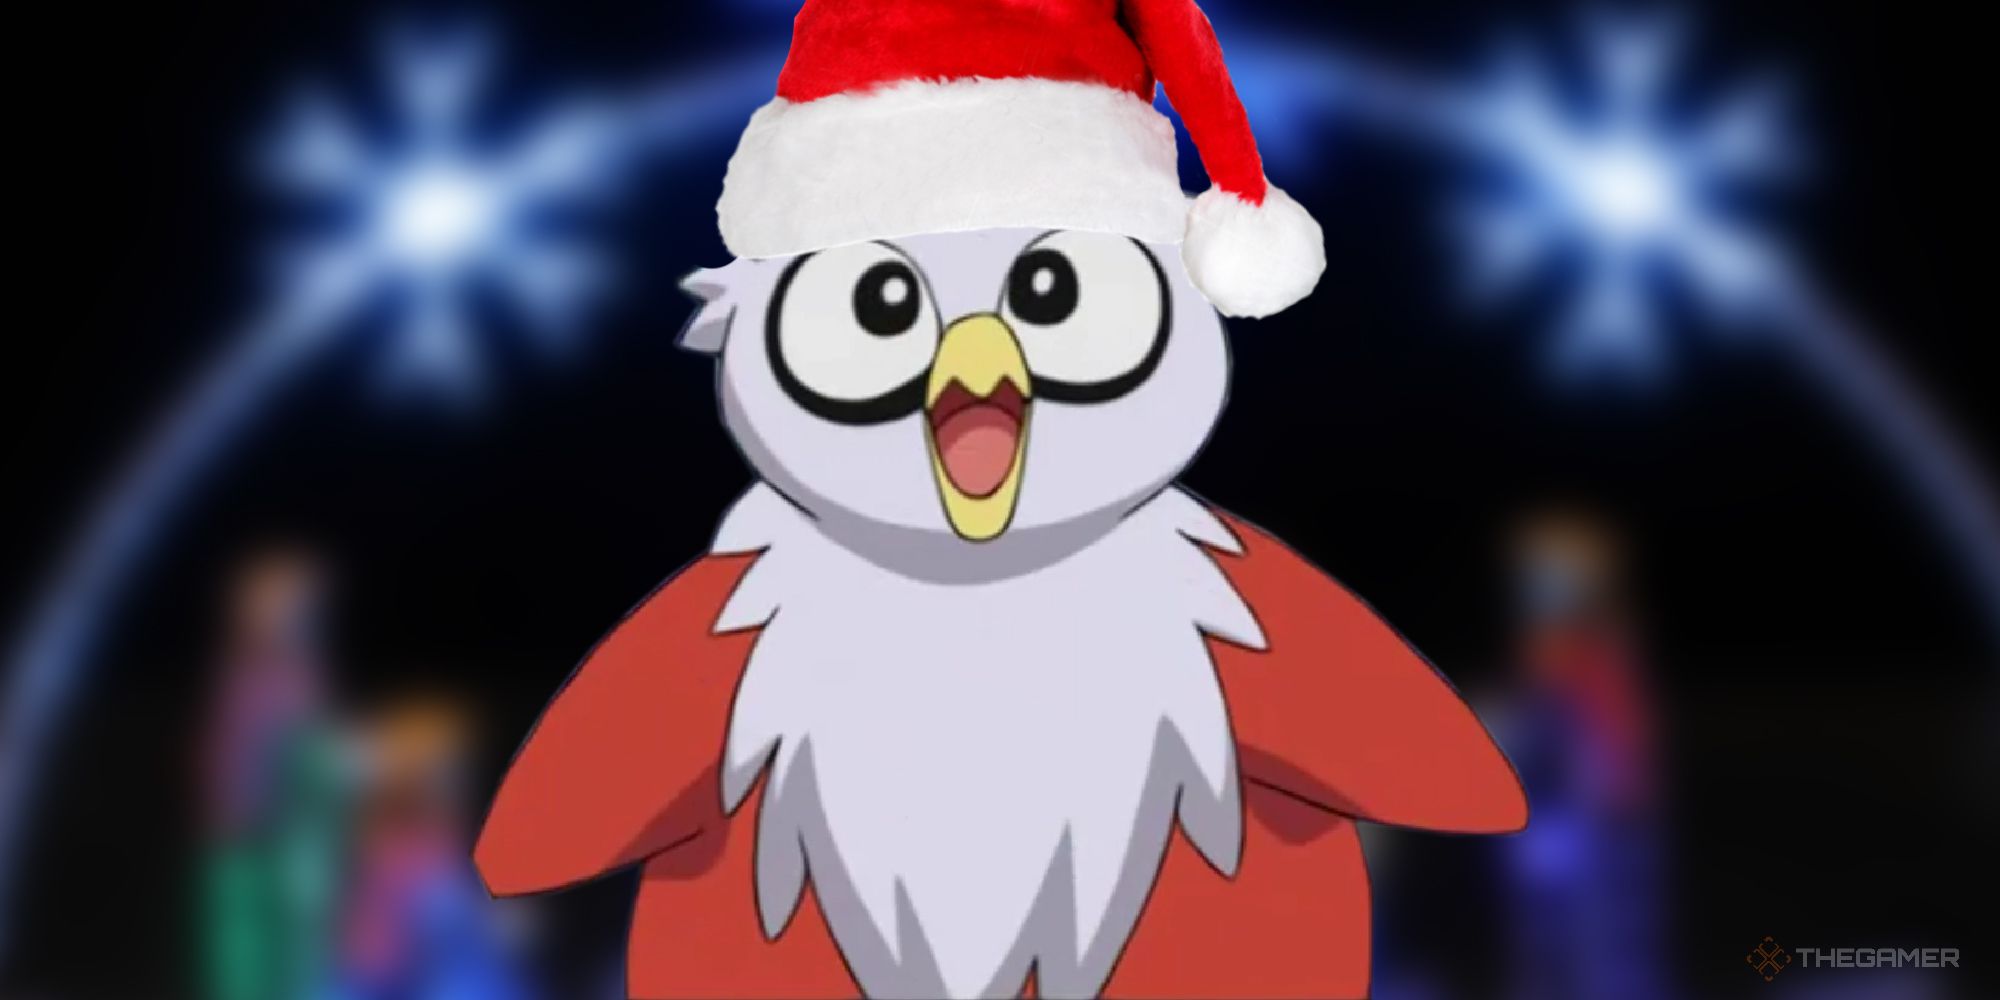 Delibird Is Not A Christmas Pokemon And I Want It To Go Away